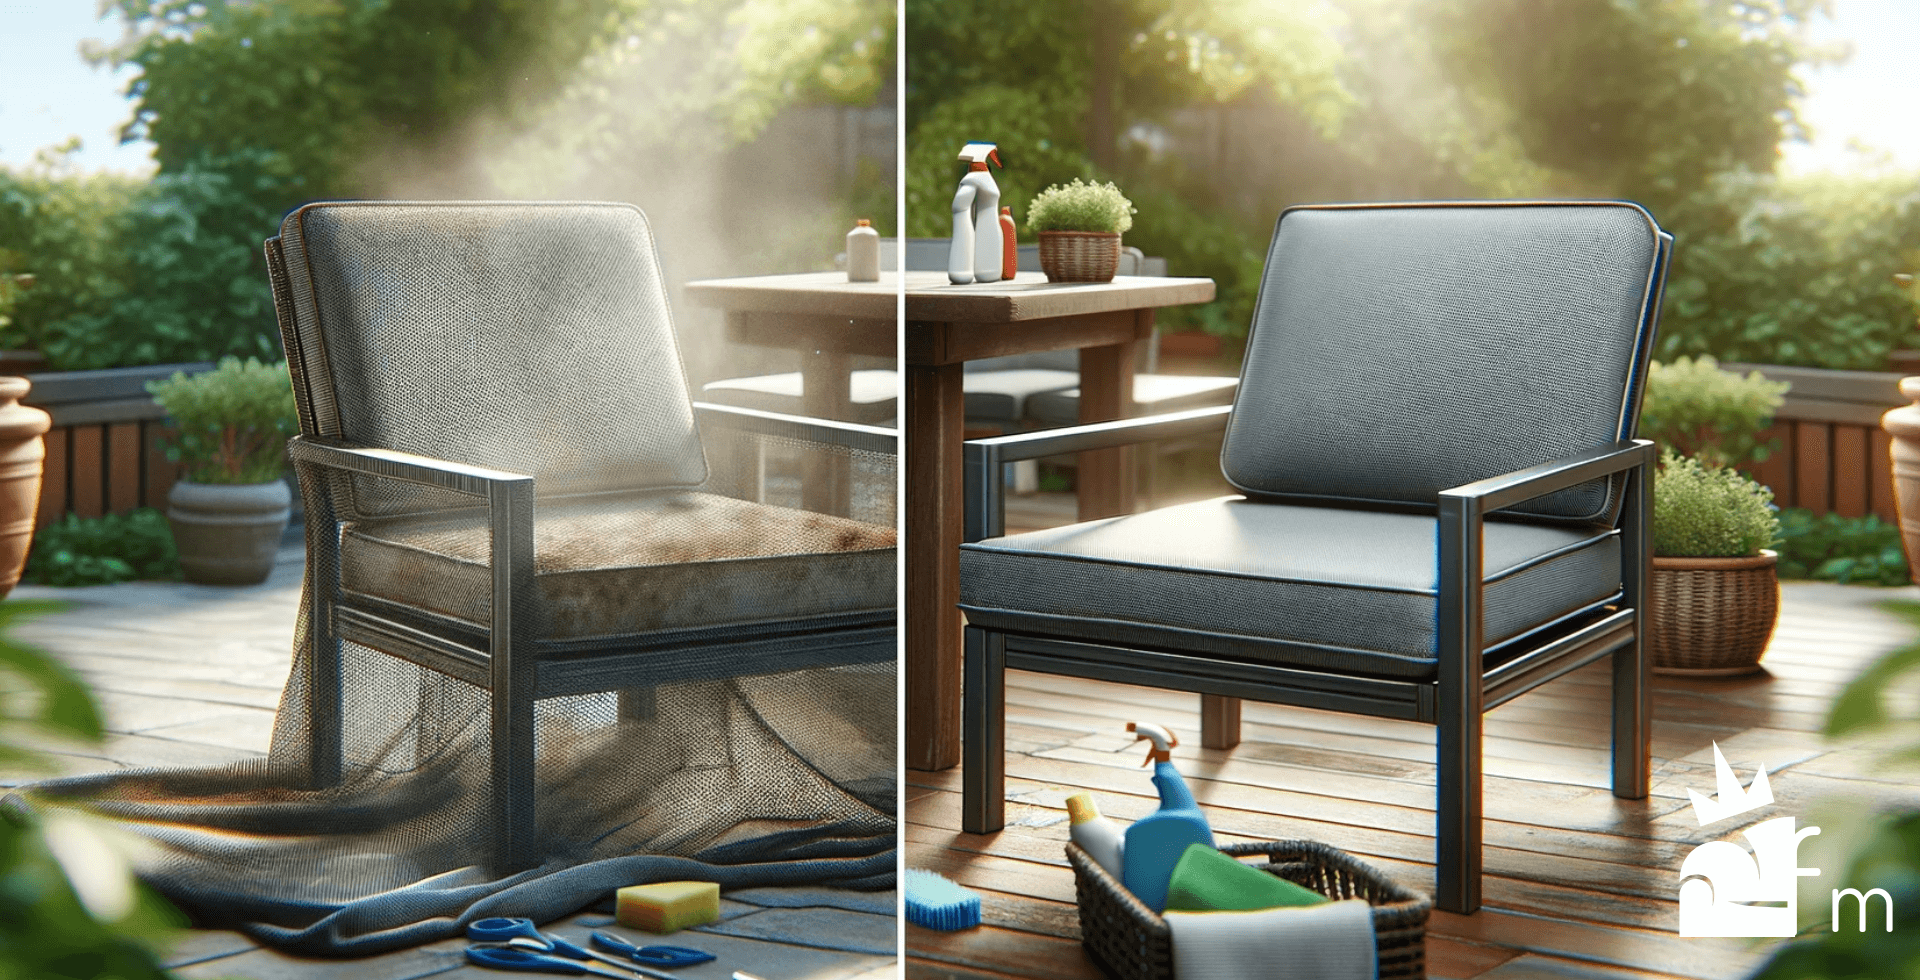 How To Clean Patio Furniture Mesh